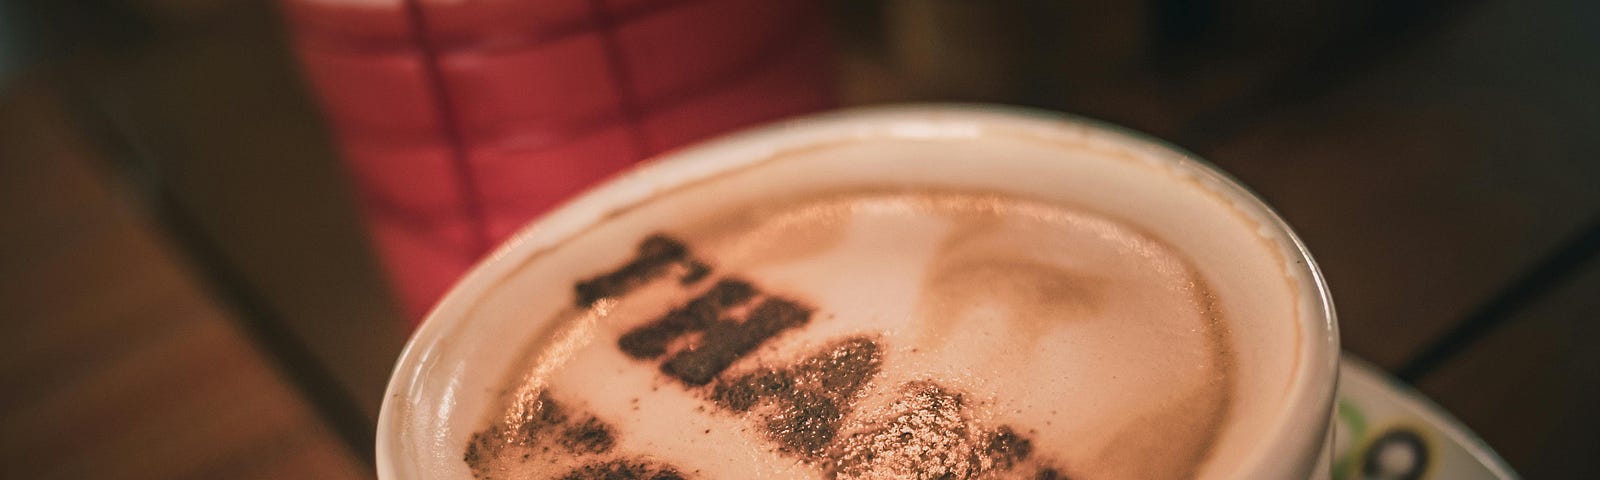 A cup of coffee with Thank you written with chocolate powder as frosting